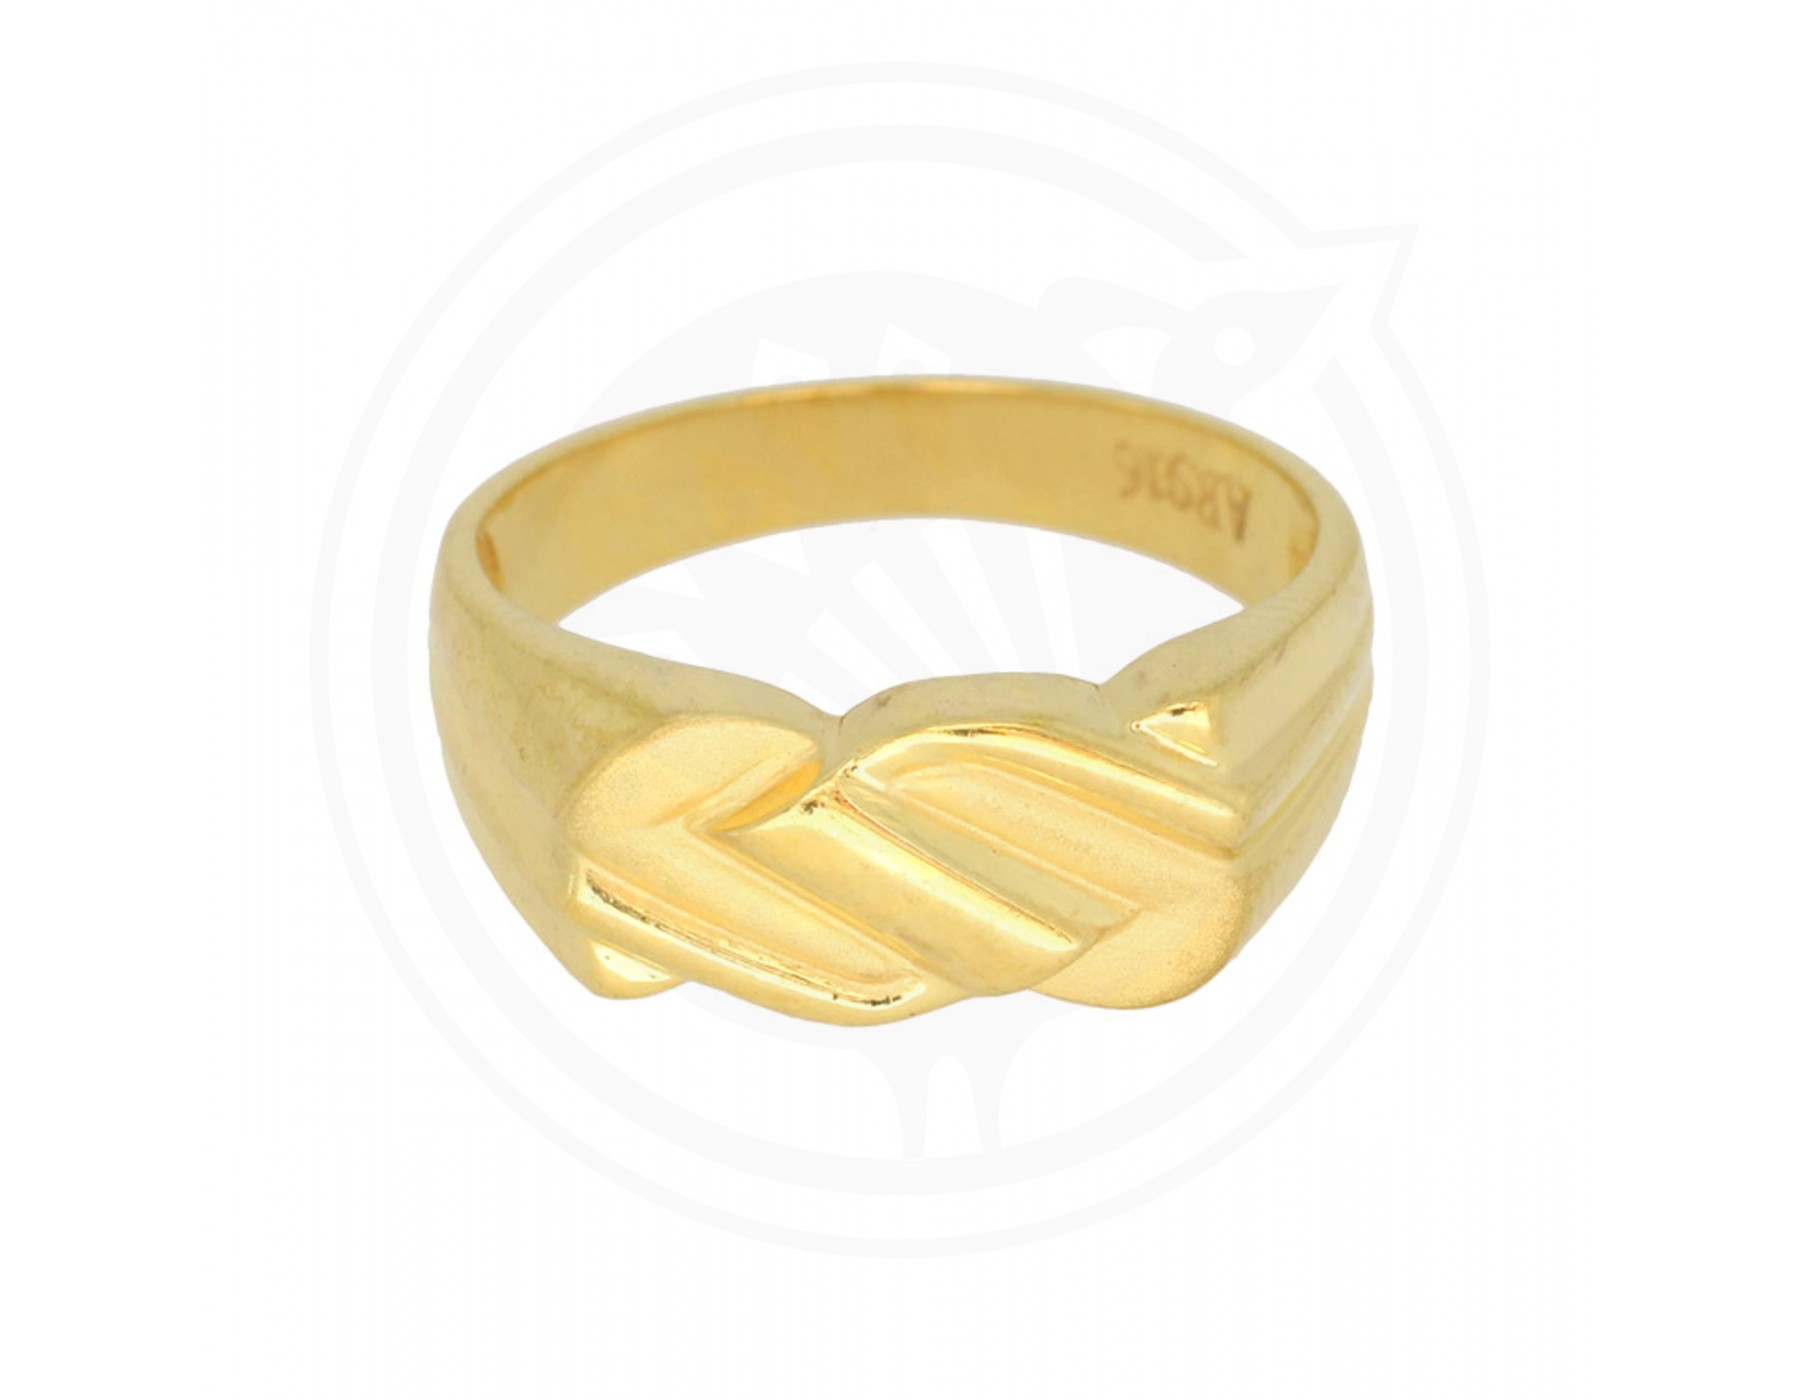 Buy quality Gold 22.k Fancy Gents Rings in Ahmedabad